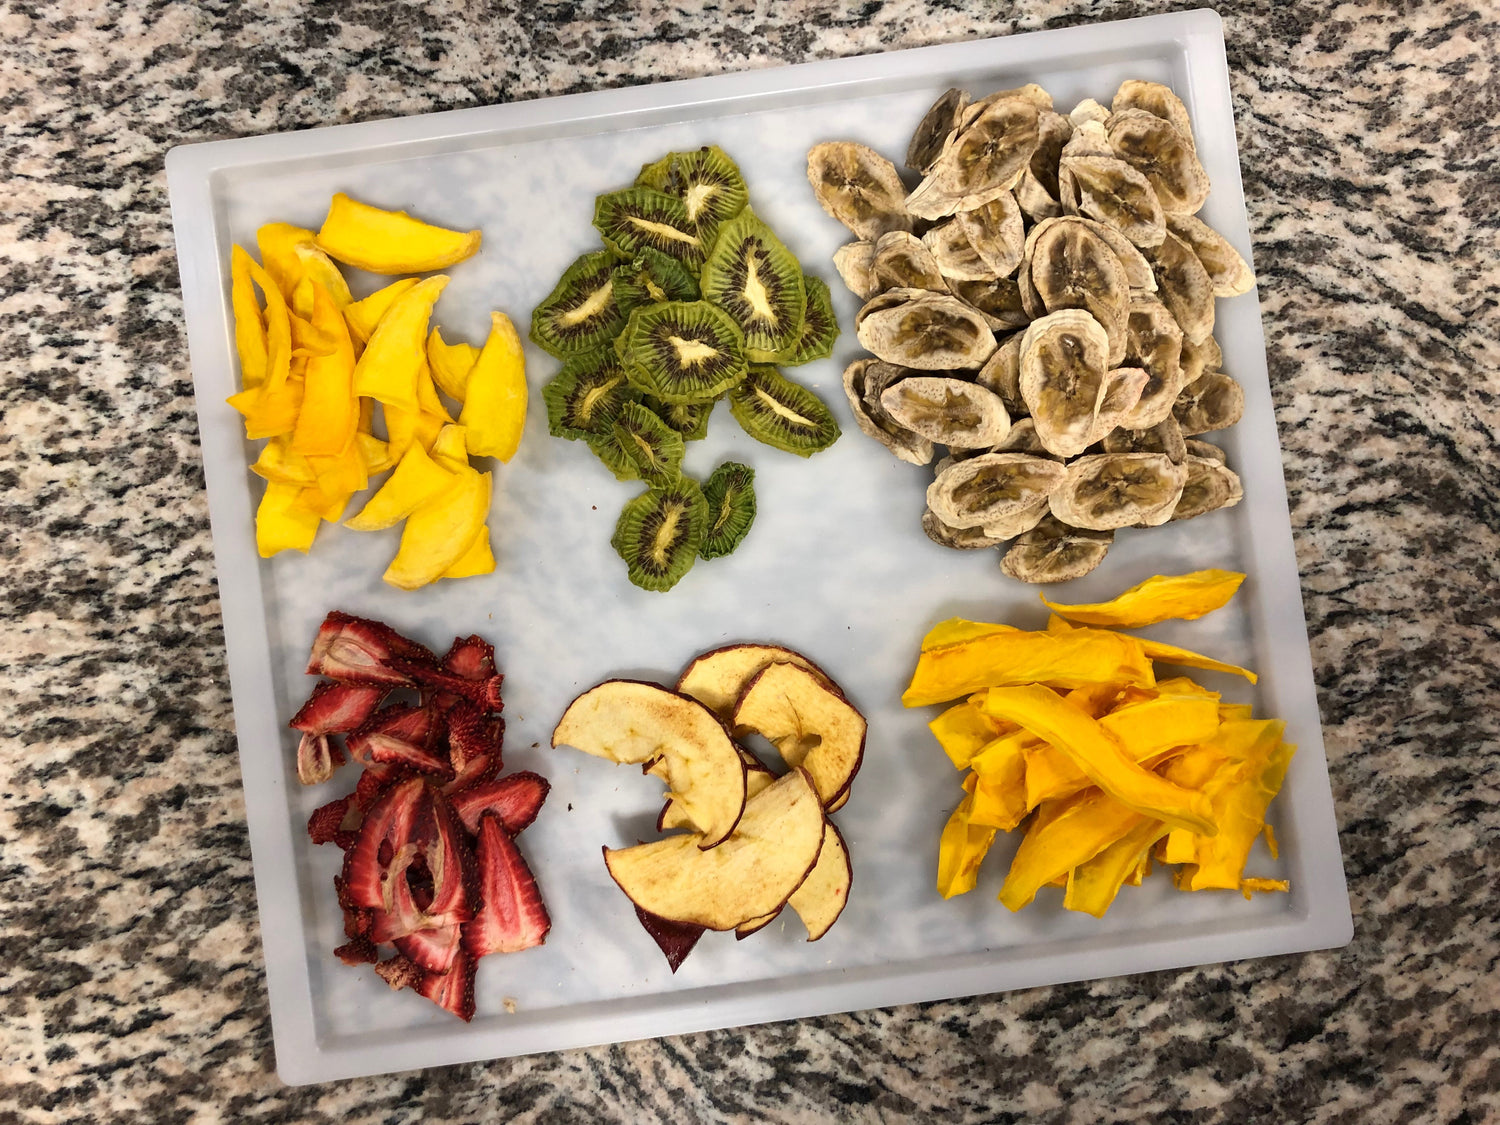 How to Dehydrate Food with an Air Fryer or Dehydrator